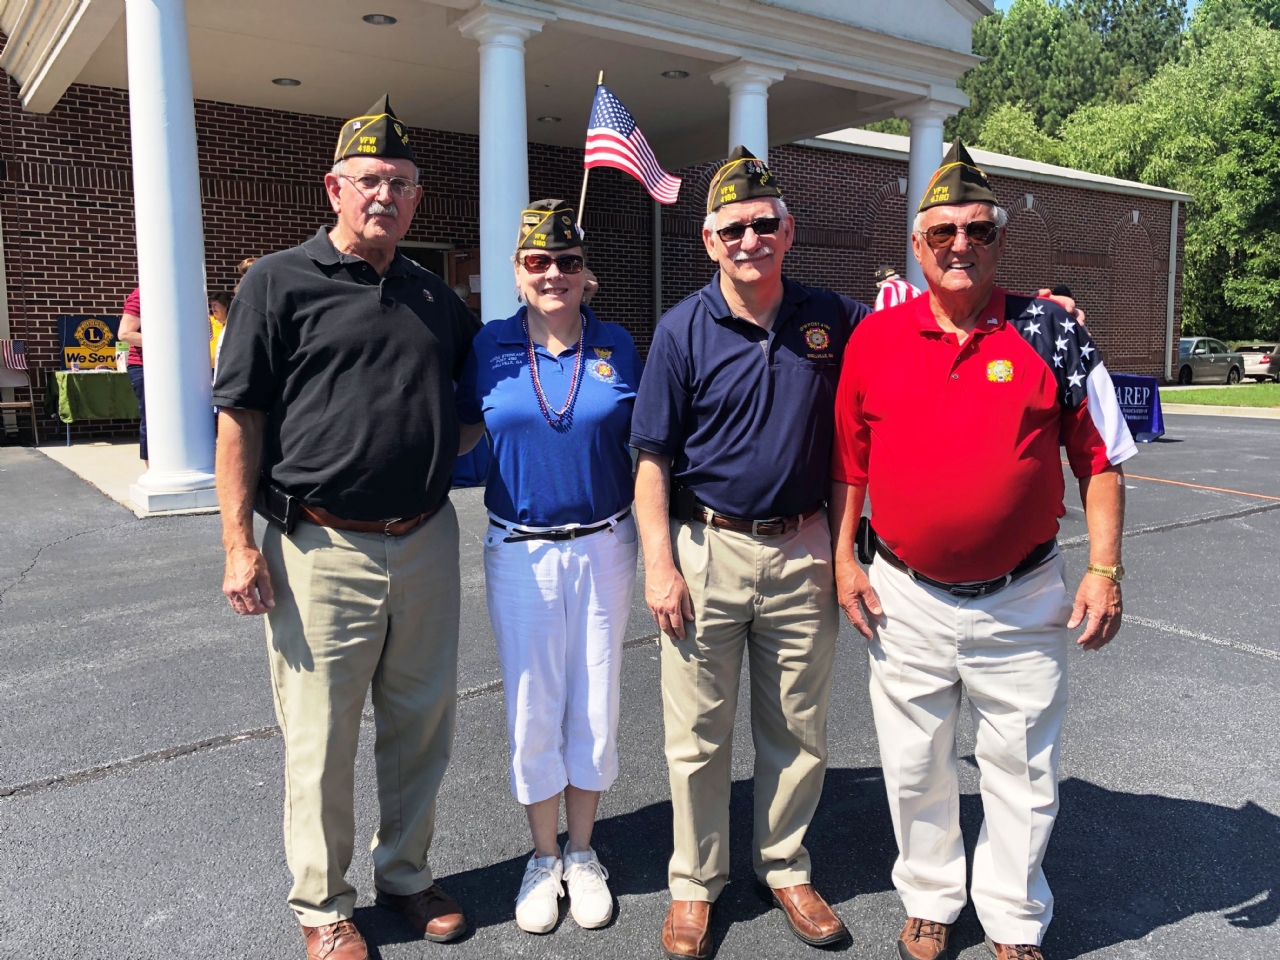 Post 4180 members take part in the Annual Snellville Flag Day Celebration June 15, 2019